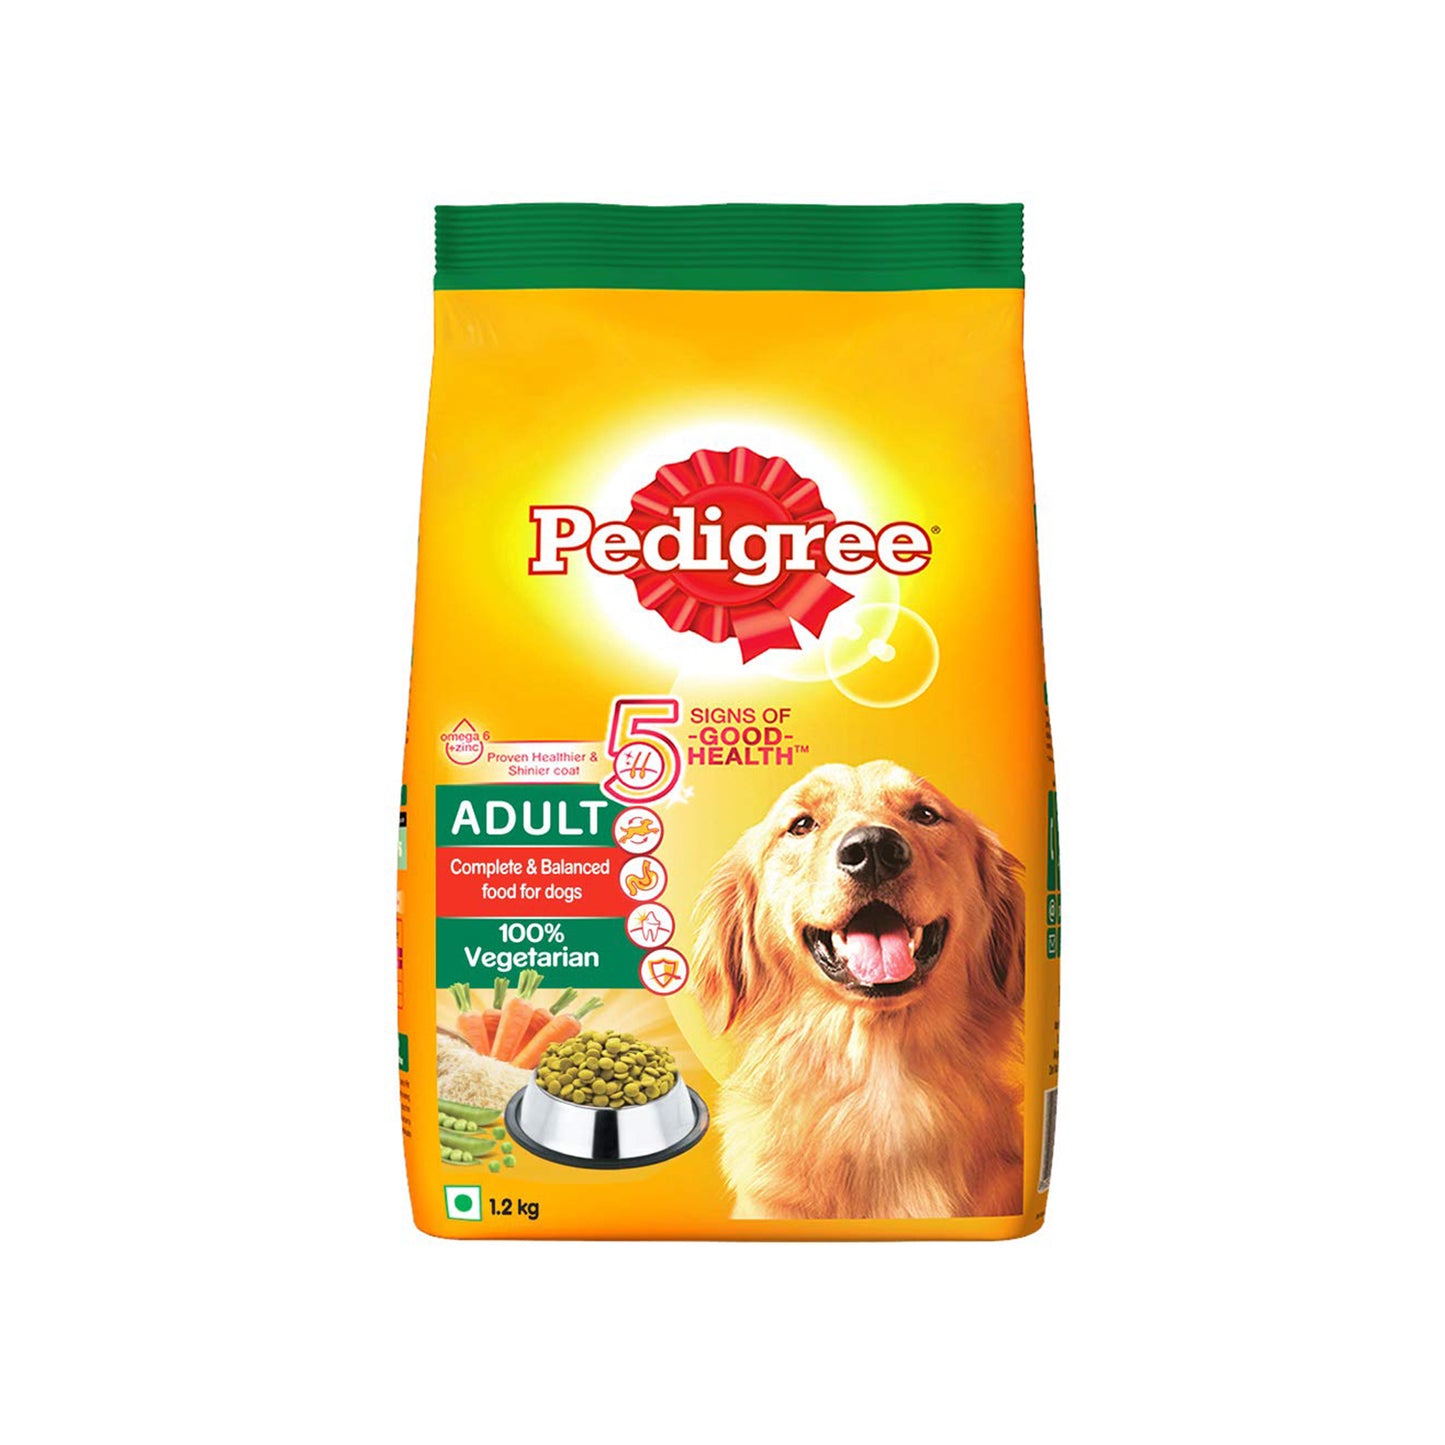 Pedigree - 100% Vegetarian Complete & Balanced Food for Puppy & Adult Dogs